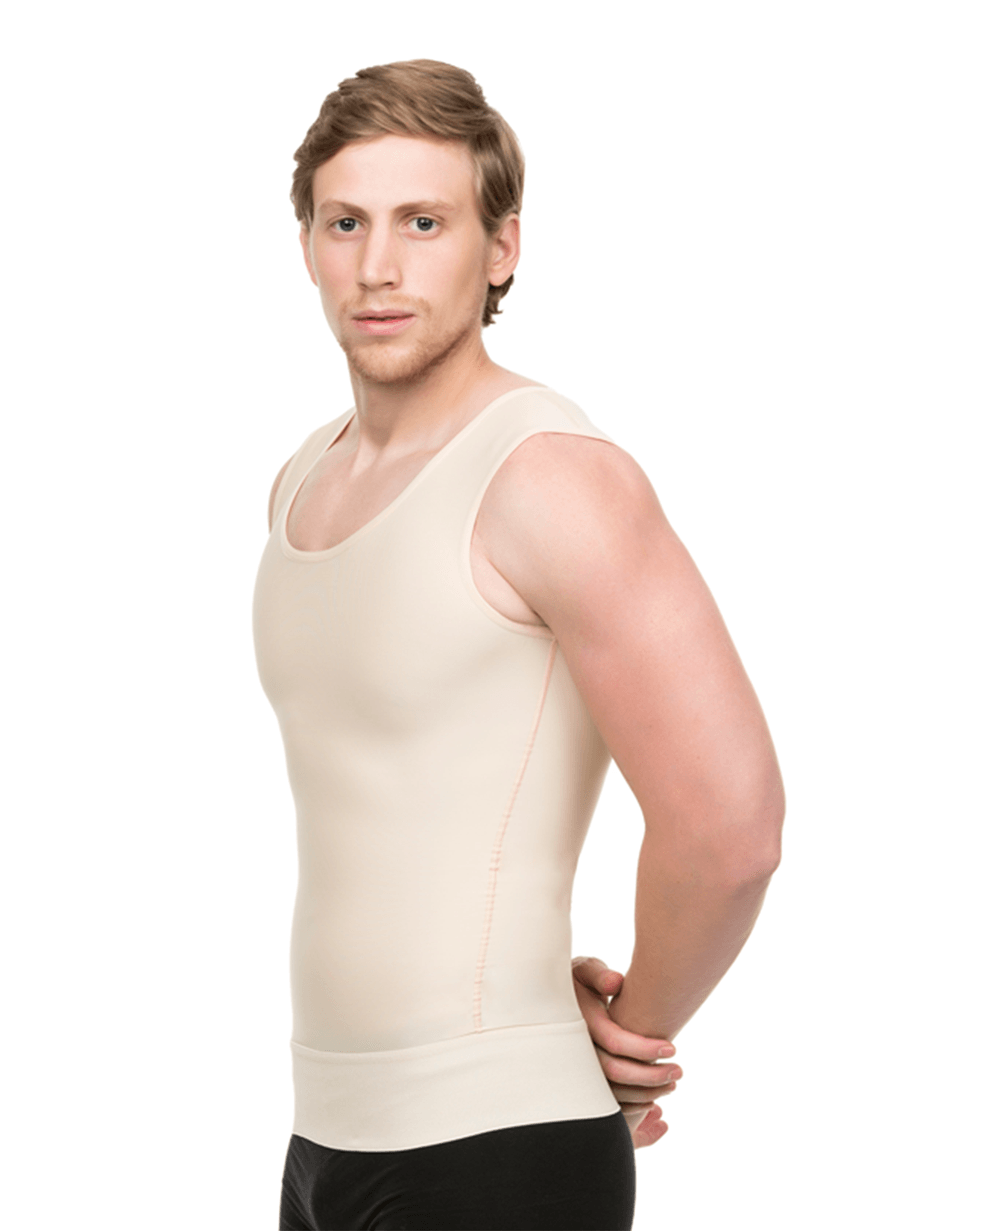 Buy Isavela Post Surgical (Stage 1) Compression Body Suit w